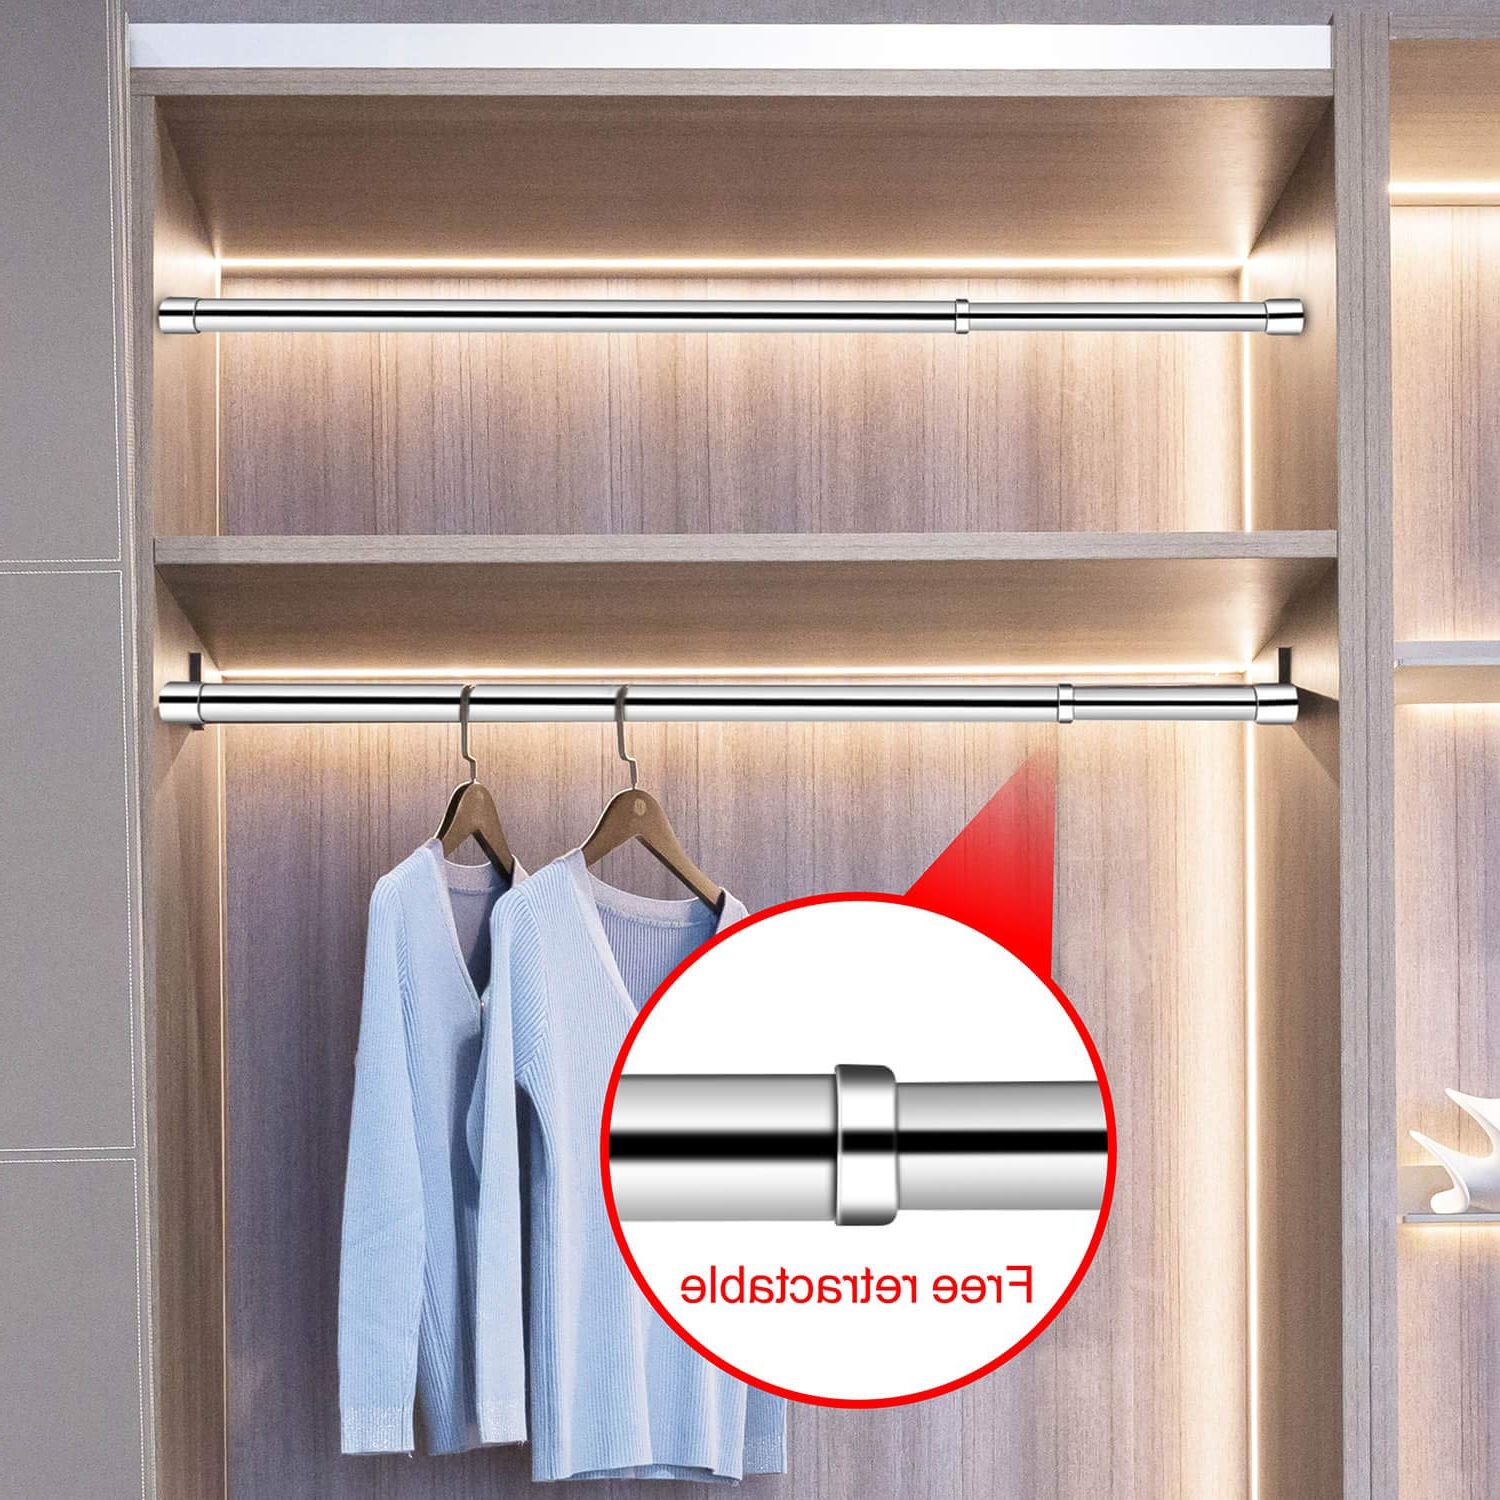 2017 Wardrobes With Hanging Rod Inside Ashop 2 Pack Expandable Closet Rod For Hanging Clothes Stainless Steel  Closet Pole For 30 48 In Closet Bar With 2 Brackets For Wardrobes Closet  Shower Window Curtain Hanger Rod Clothes Rod For (View 2 of 10)